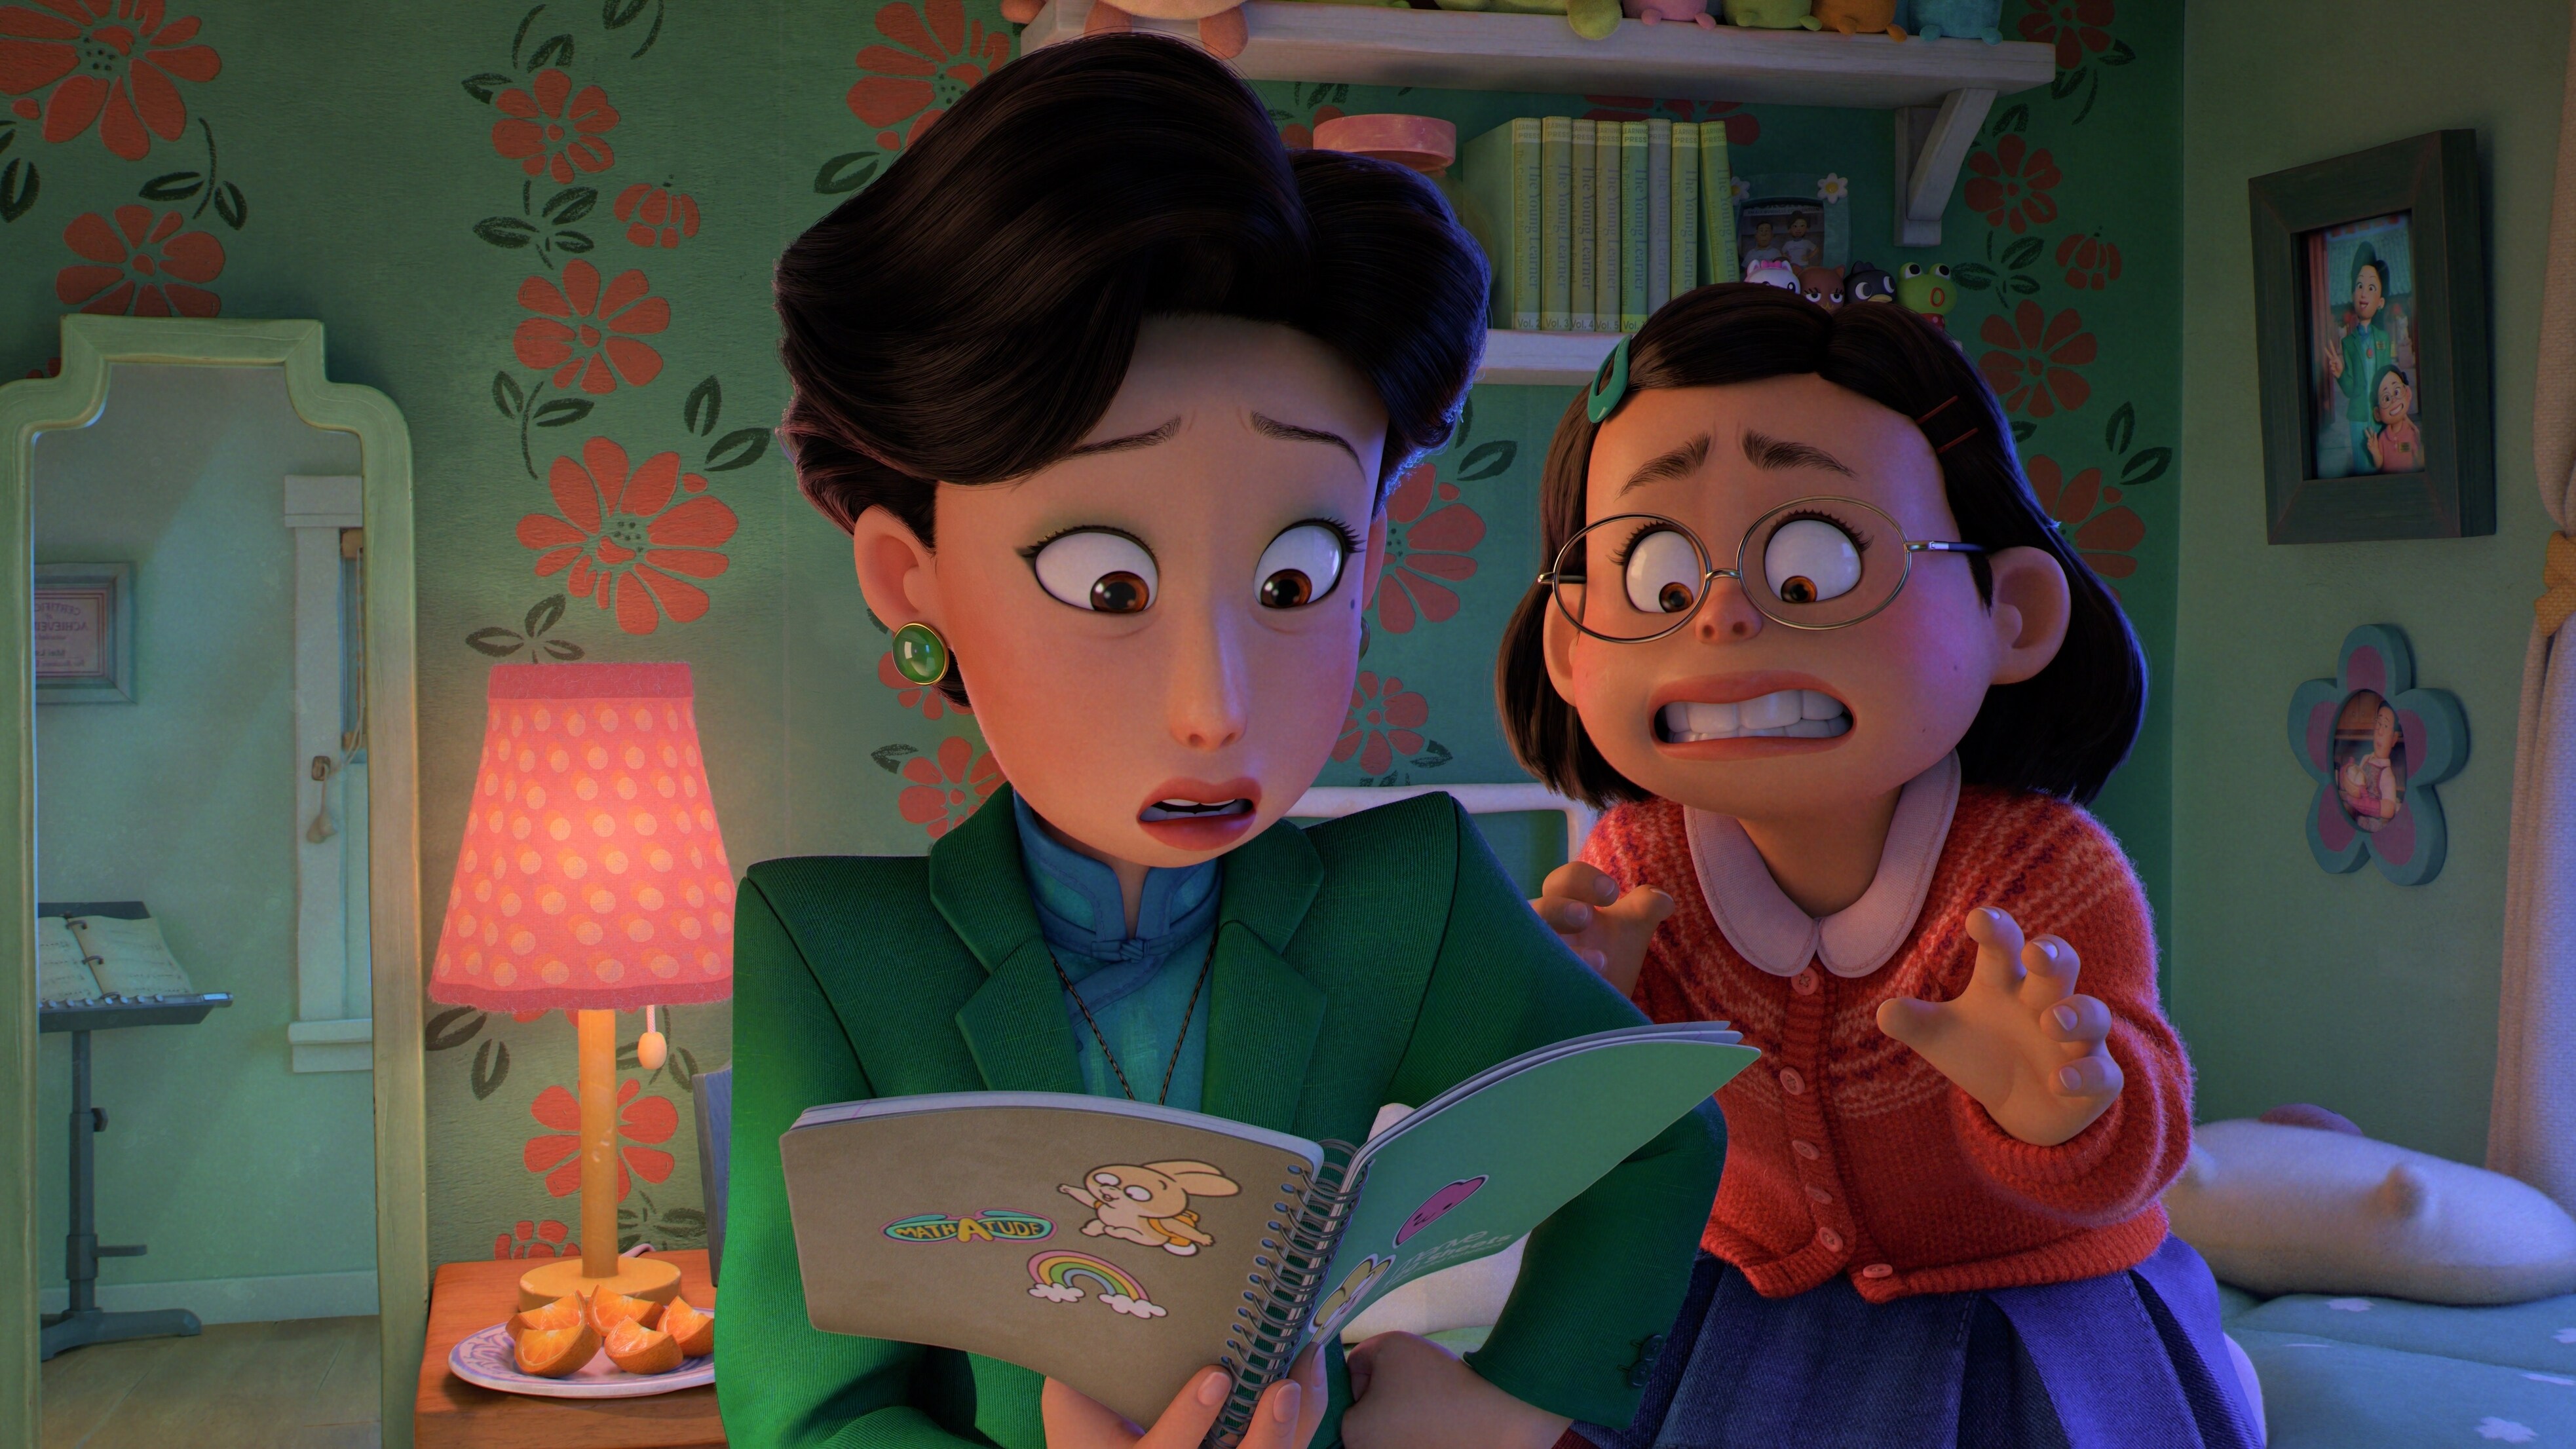 MOTHER, PLEASE! -- Disney and Pixar’s all-new original feature film “Turning Red” introduces 13-year-old Mei Lee and her mother, Ming. They’ve always been close, so when Mei begins showing interest in typical teenager things—like boys, for example—Ming is a little (or a lot) tempted to overreact. Featuring Rosalie Chiang as the voice of Mei Lee, and Sandra Oh as the voice of Ming, “Turning Red” will debut exclusively on Disney+ (where Disney+ is available) on March 11, 2022. © 2022 Disney/Pixar. All Rights Reserved.